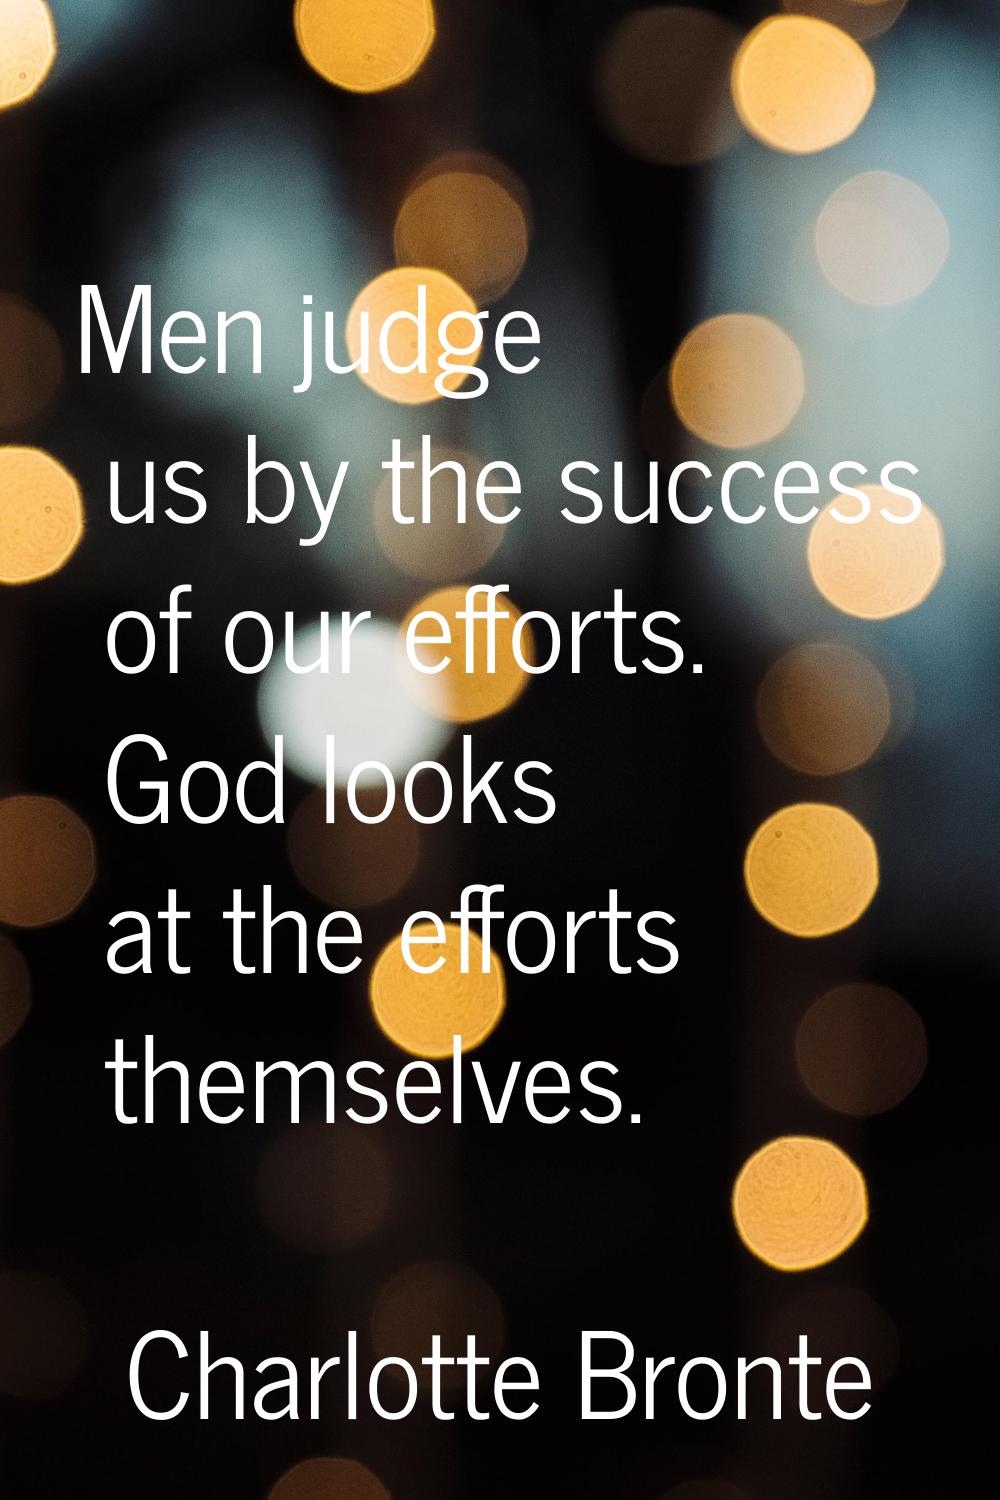 Men judge us by the success of our efforts. God looks at the efforts themselves.